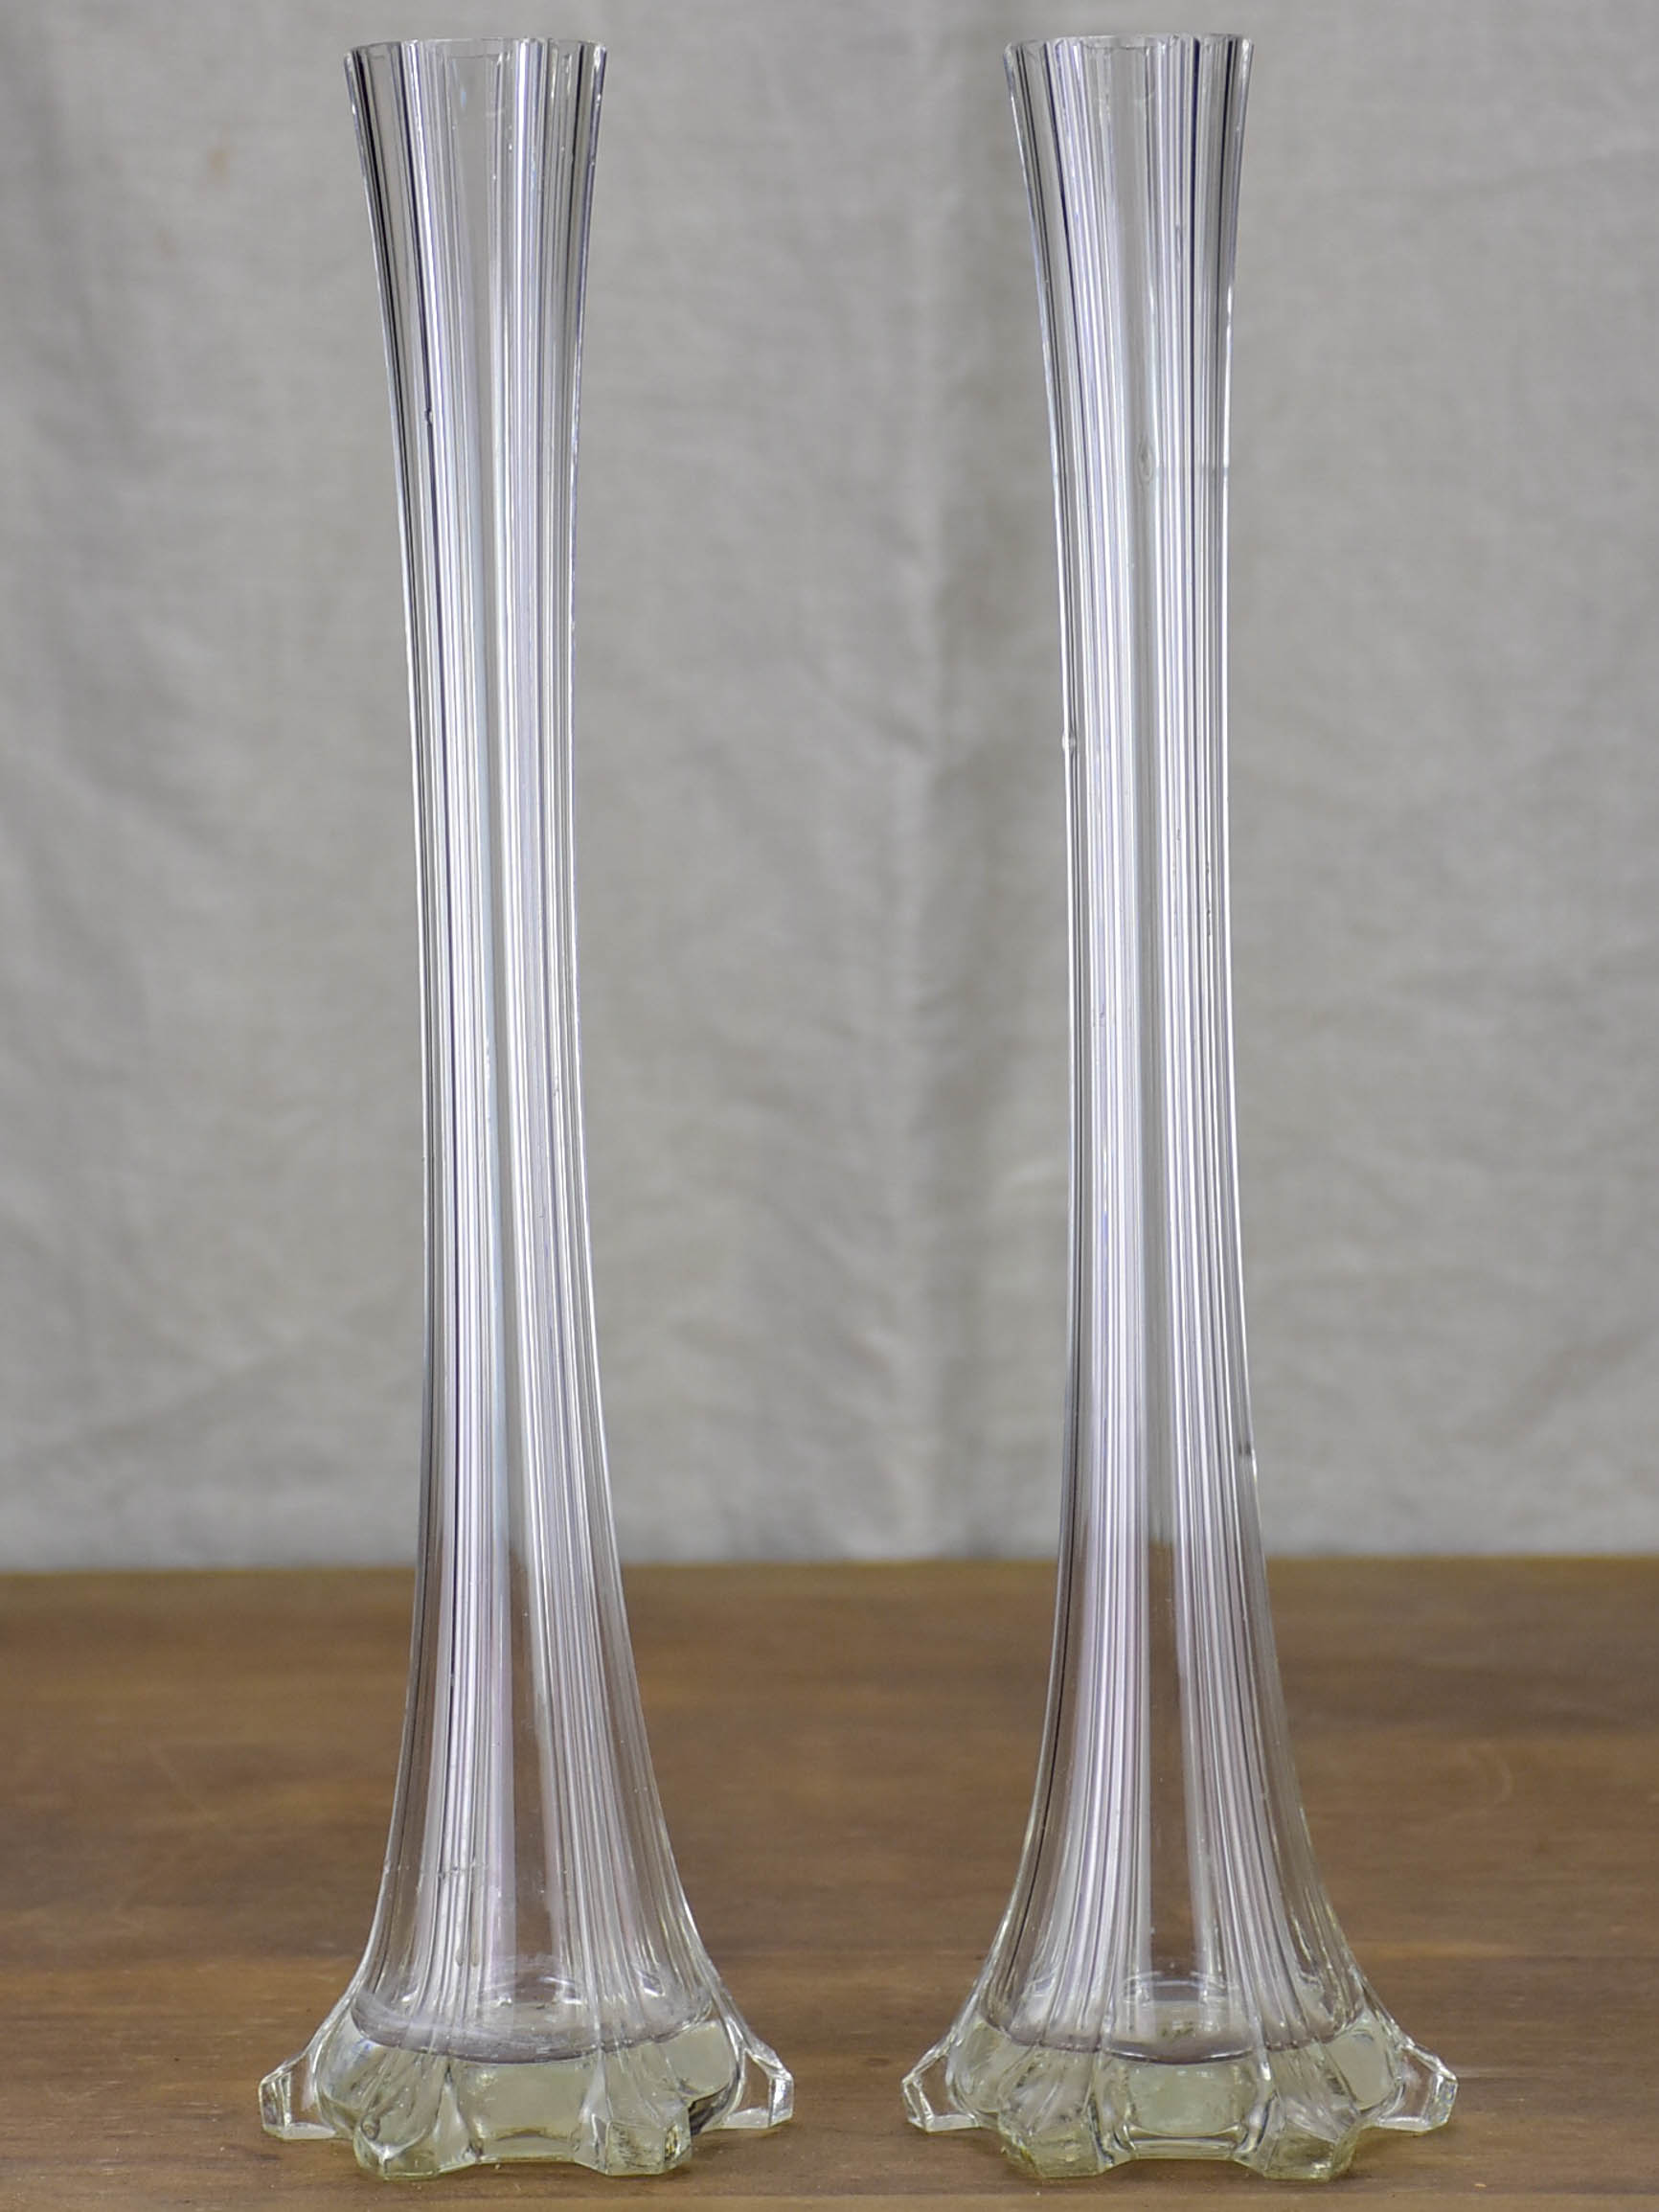 Large Glass French Jar Vase - 14.25 Tall